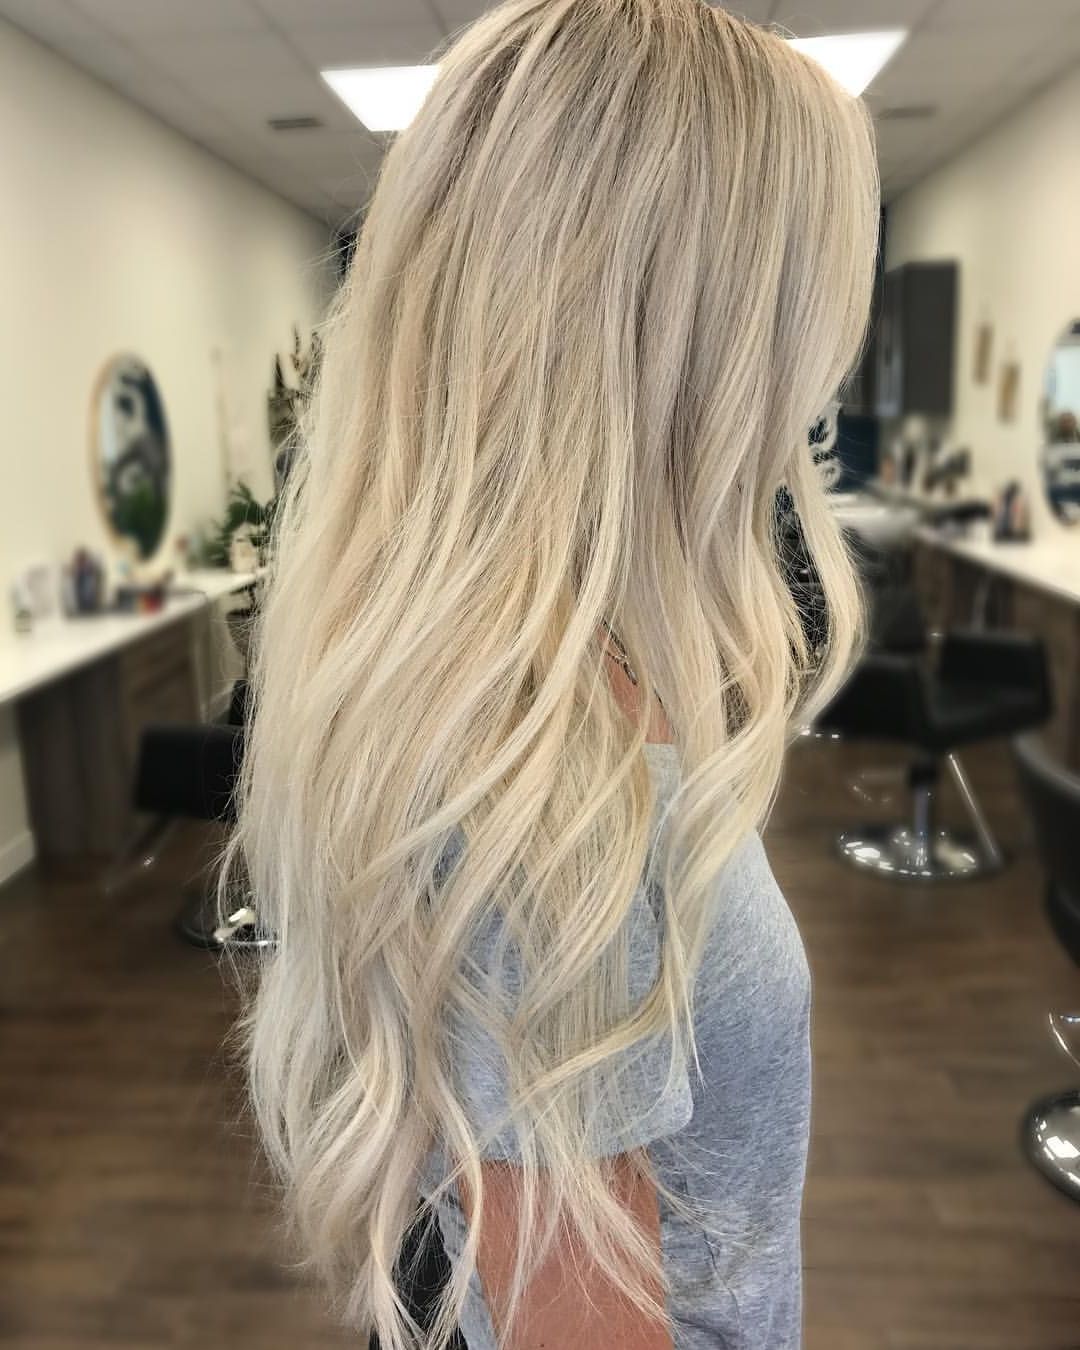 Pretty Long Hair | Hair And Makeup | Pinterest | Blonde Color In Angelic Blonde Balayage Bob Hairstyles With Curls (View 5 of 20)